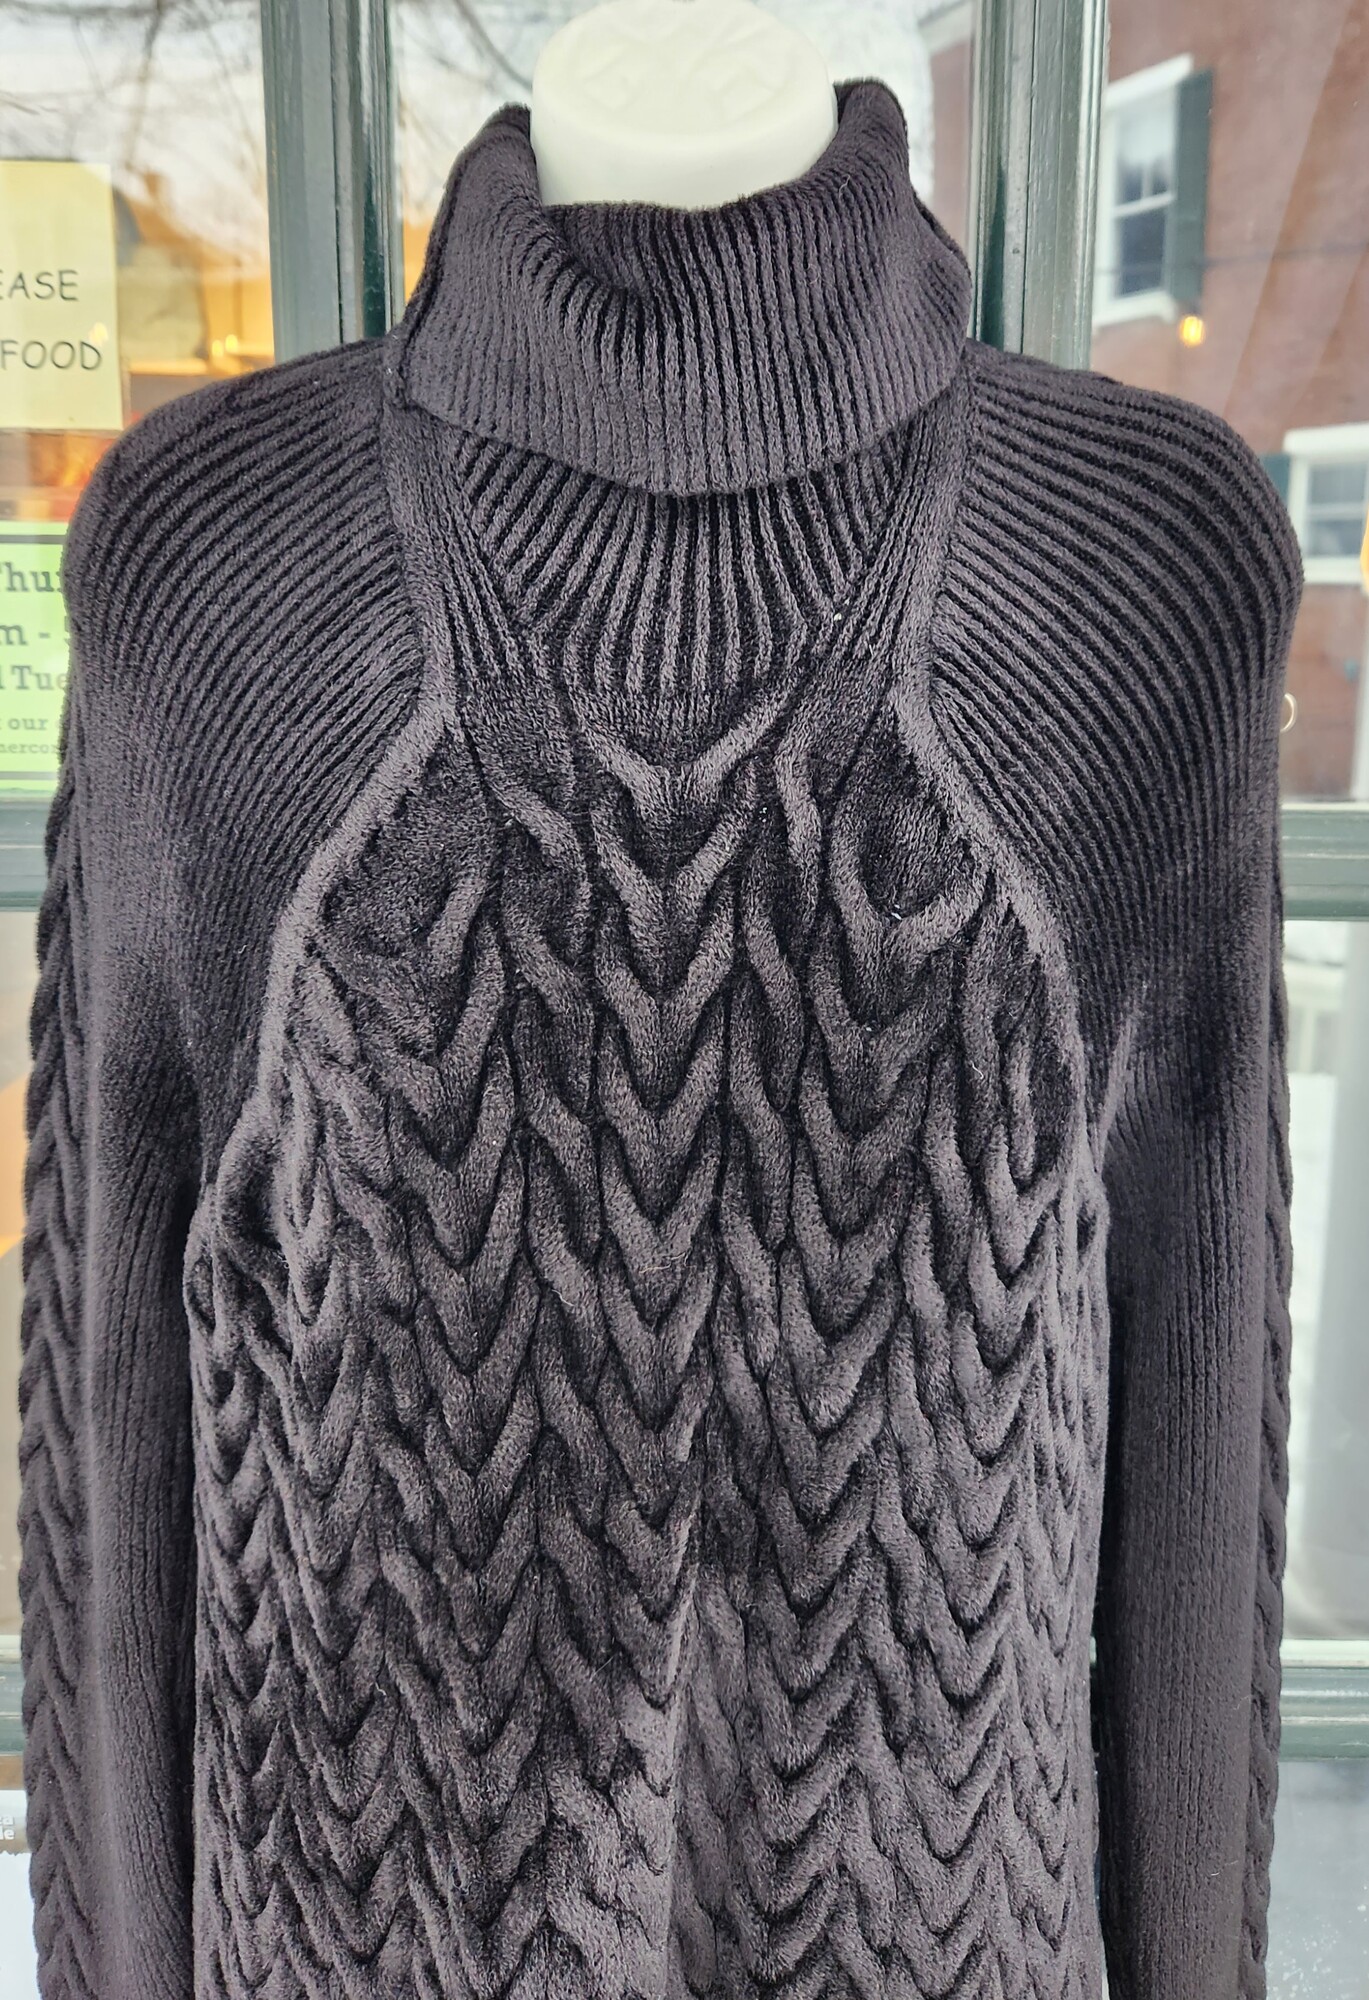 Haider Ackerman Black Cable knit turtleneck Sweater Size S
Haider Ackermann Black cable knit turtleneck jumper size Small
Black cable knit jumper from Haider Ackermann featuring a ribbed roll neck, long sleeves, a fitted silhouette and a ribbed hem and cuffs.
Pit to Pit 16 inches across
Pit down sleeve 18 inches
Waist 16.5 inches across
Down the Back 27 inches
made in Belgium
EUC
Retails $1100

model is 5'10 wearing a Small